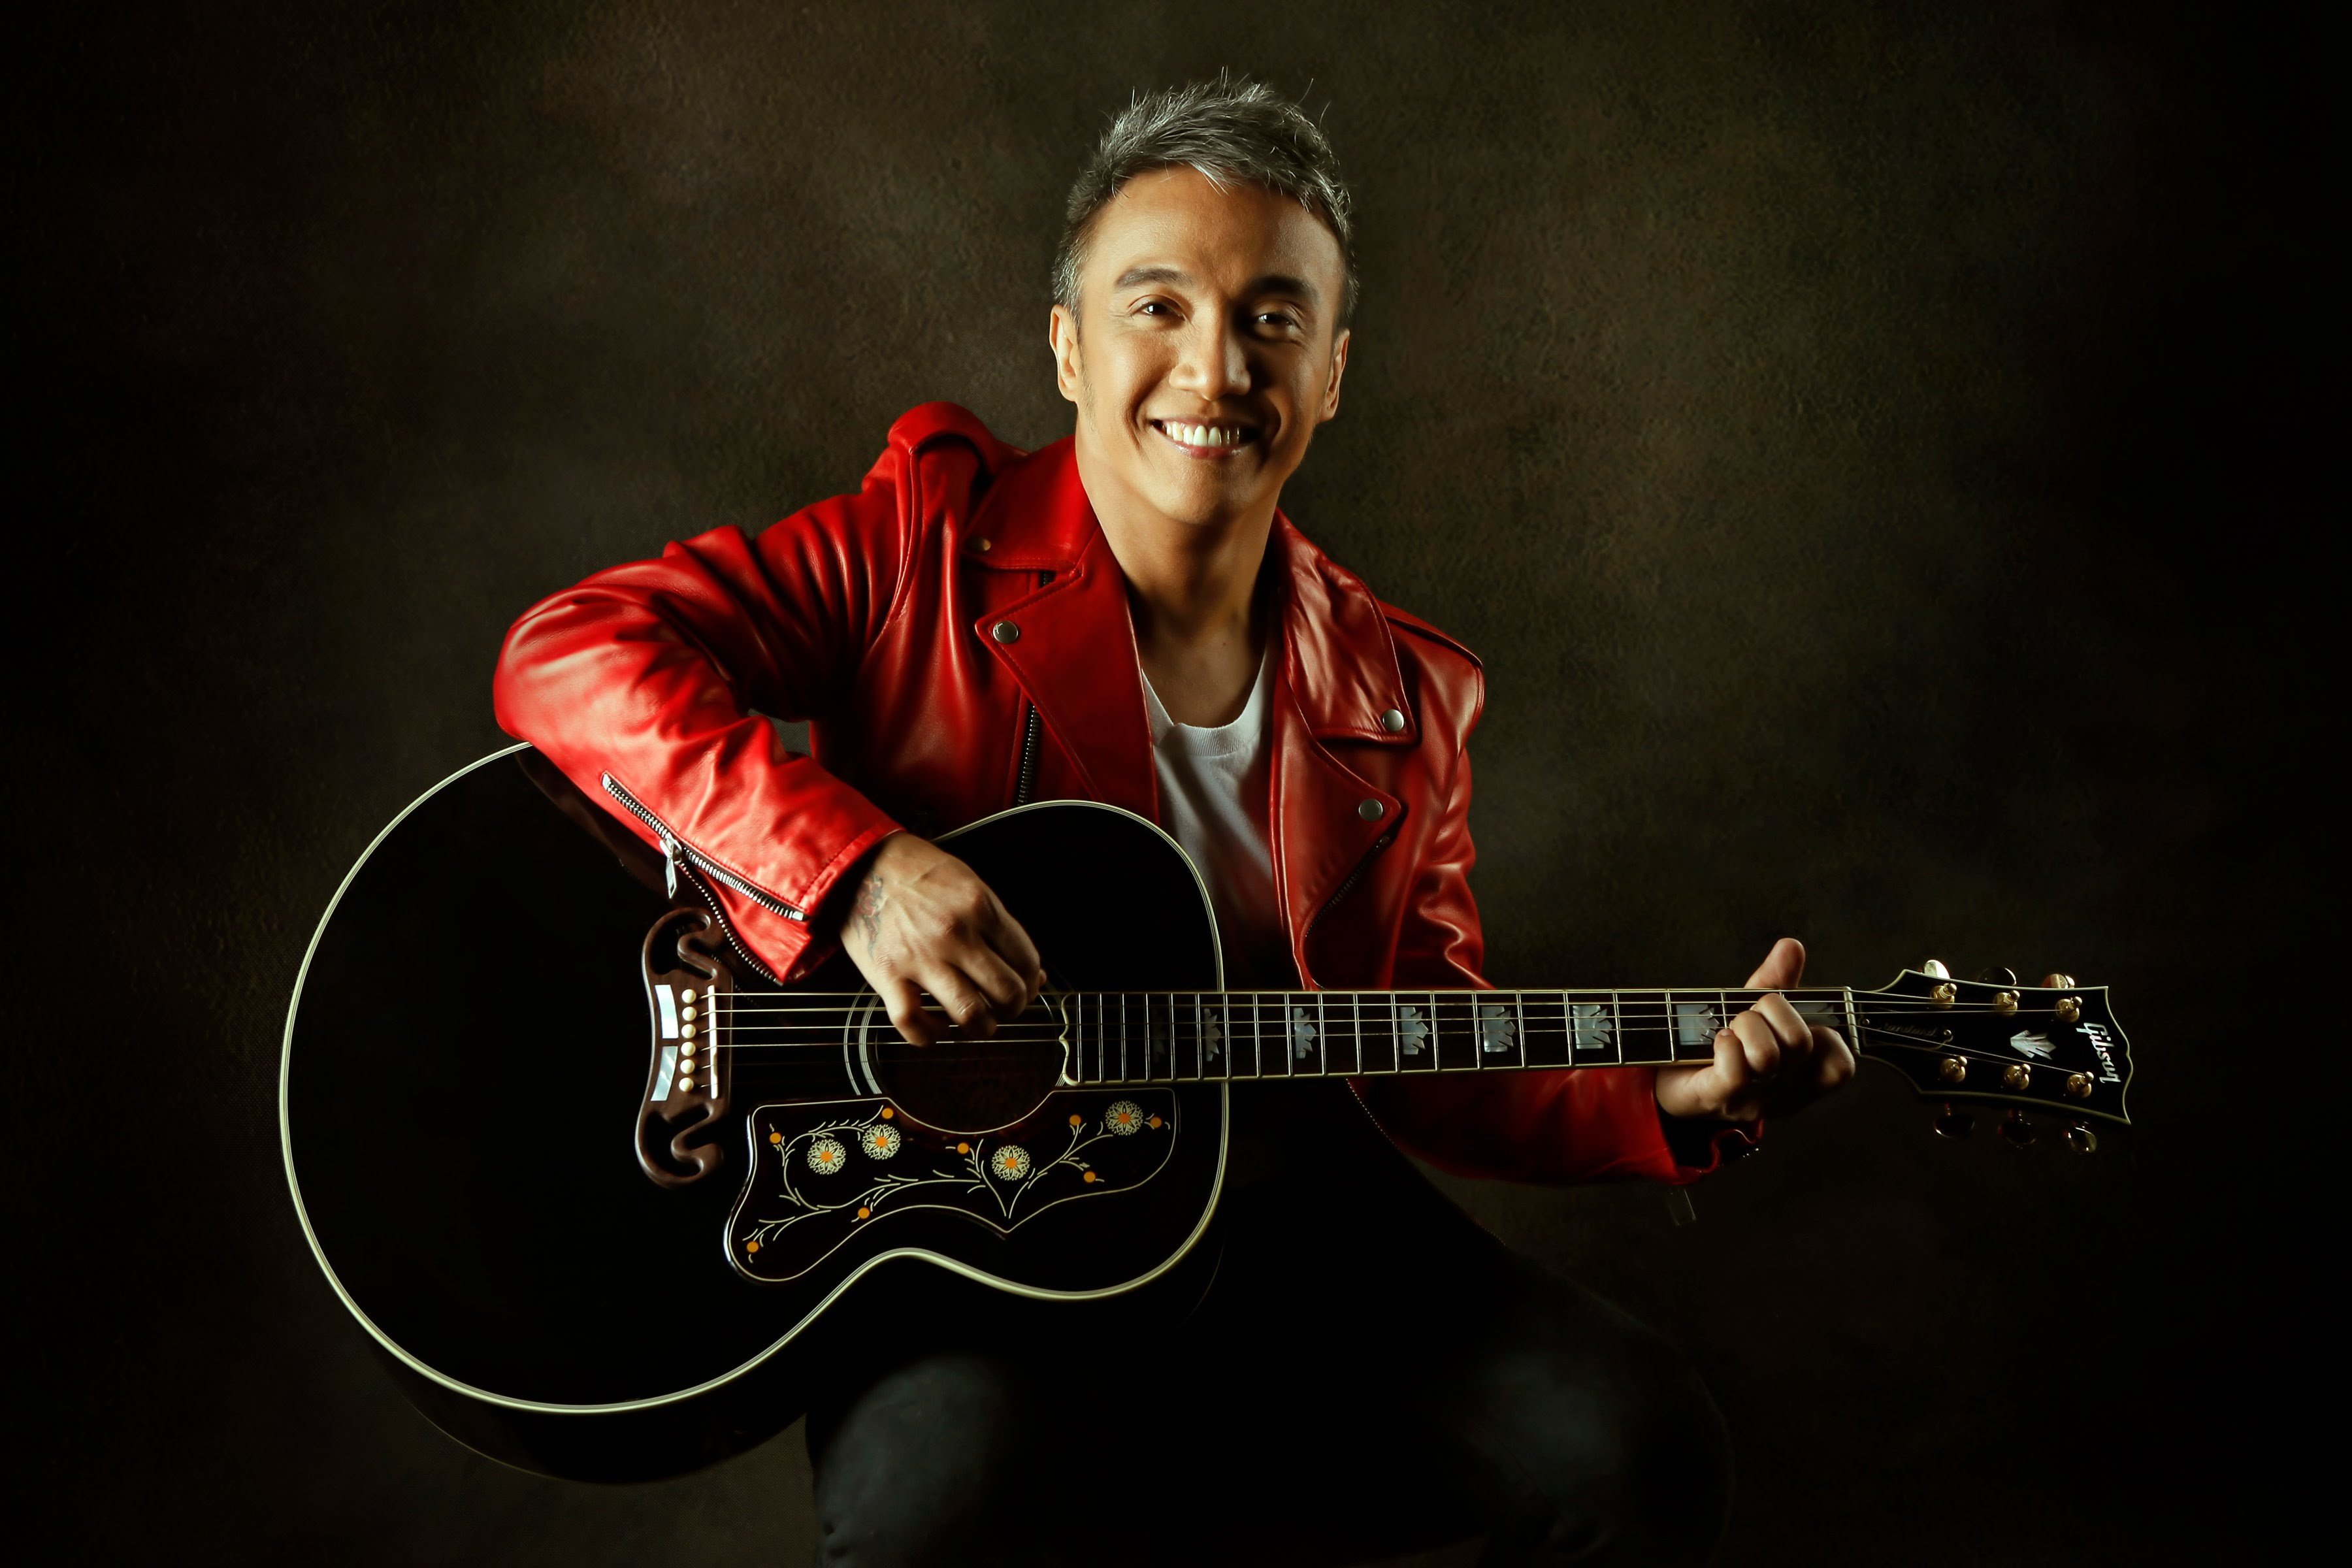 Arnel Pineda became lead singer for his musical heroes Journey in 2007.